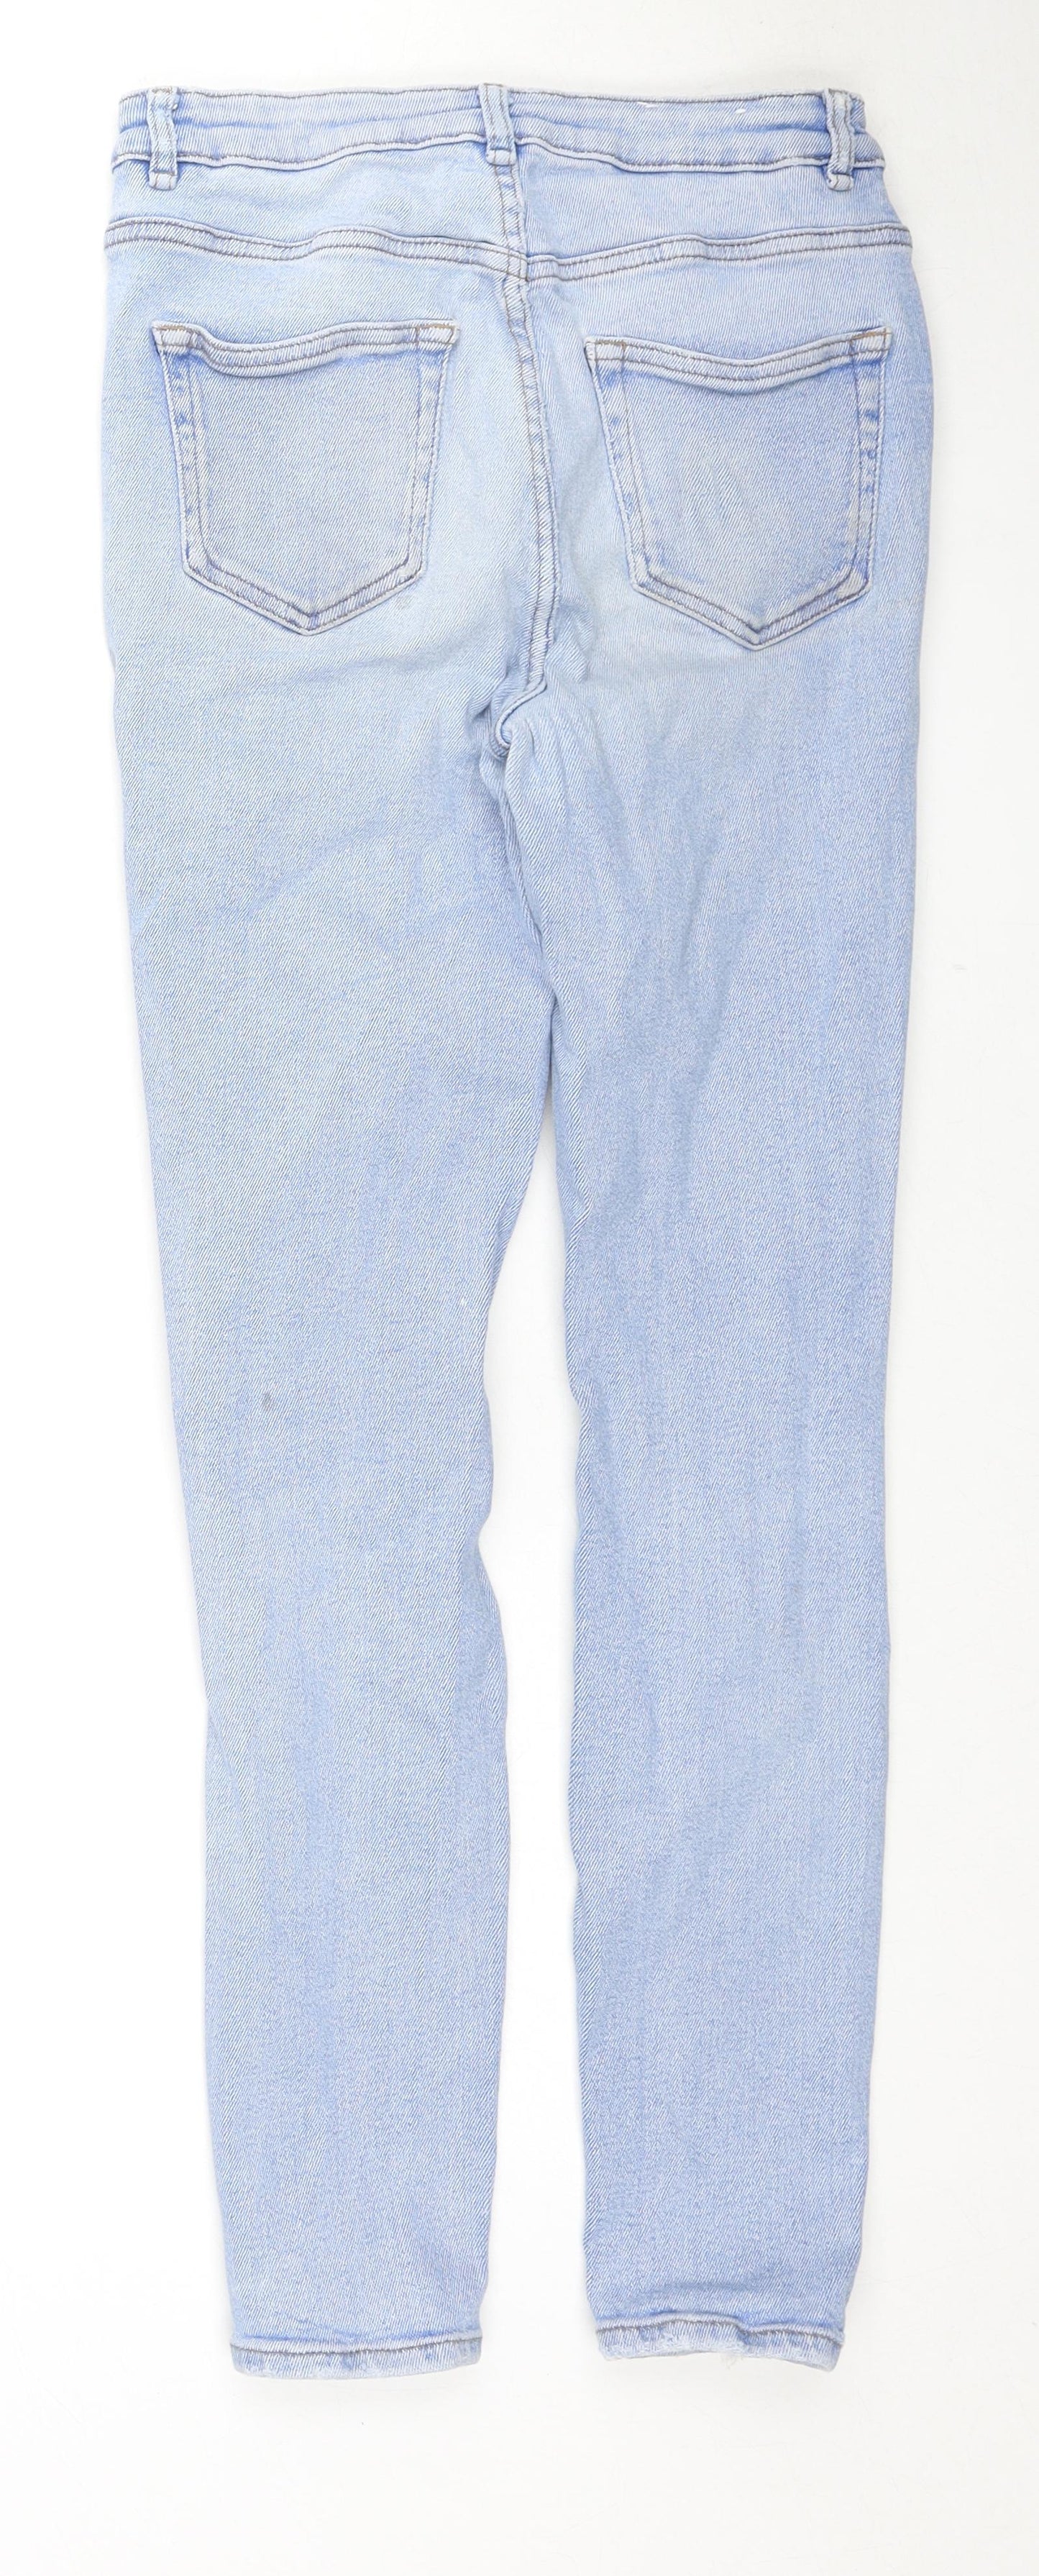 New Look Womens Blue Cotton Skinny Jeans Size 10 L28 in Regular Zip